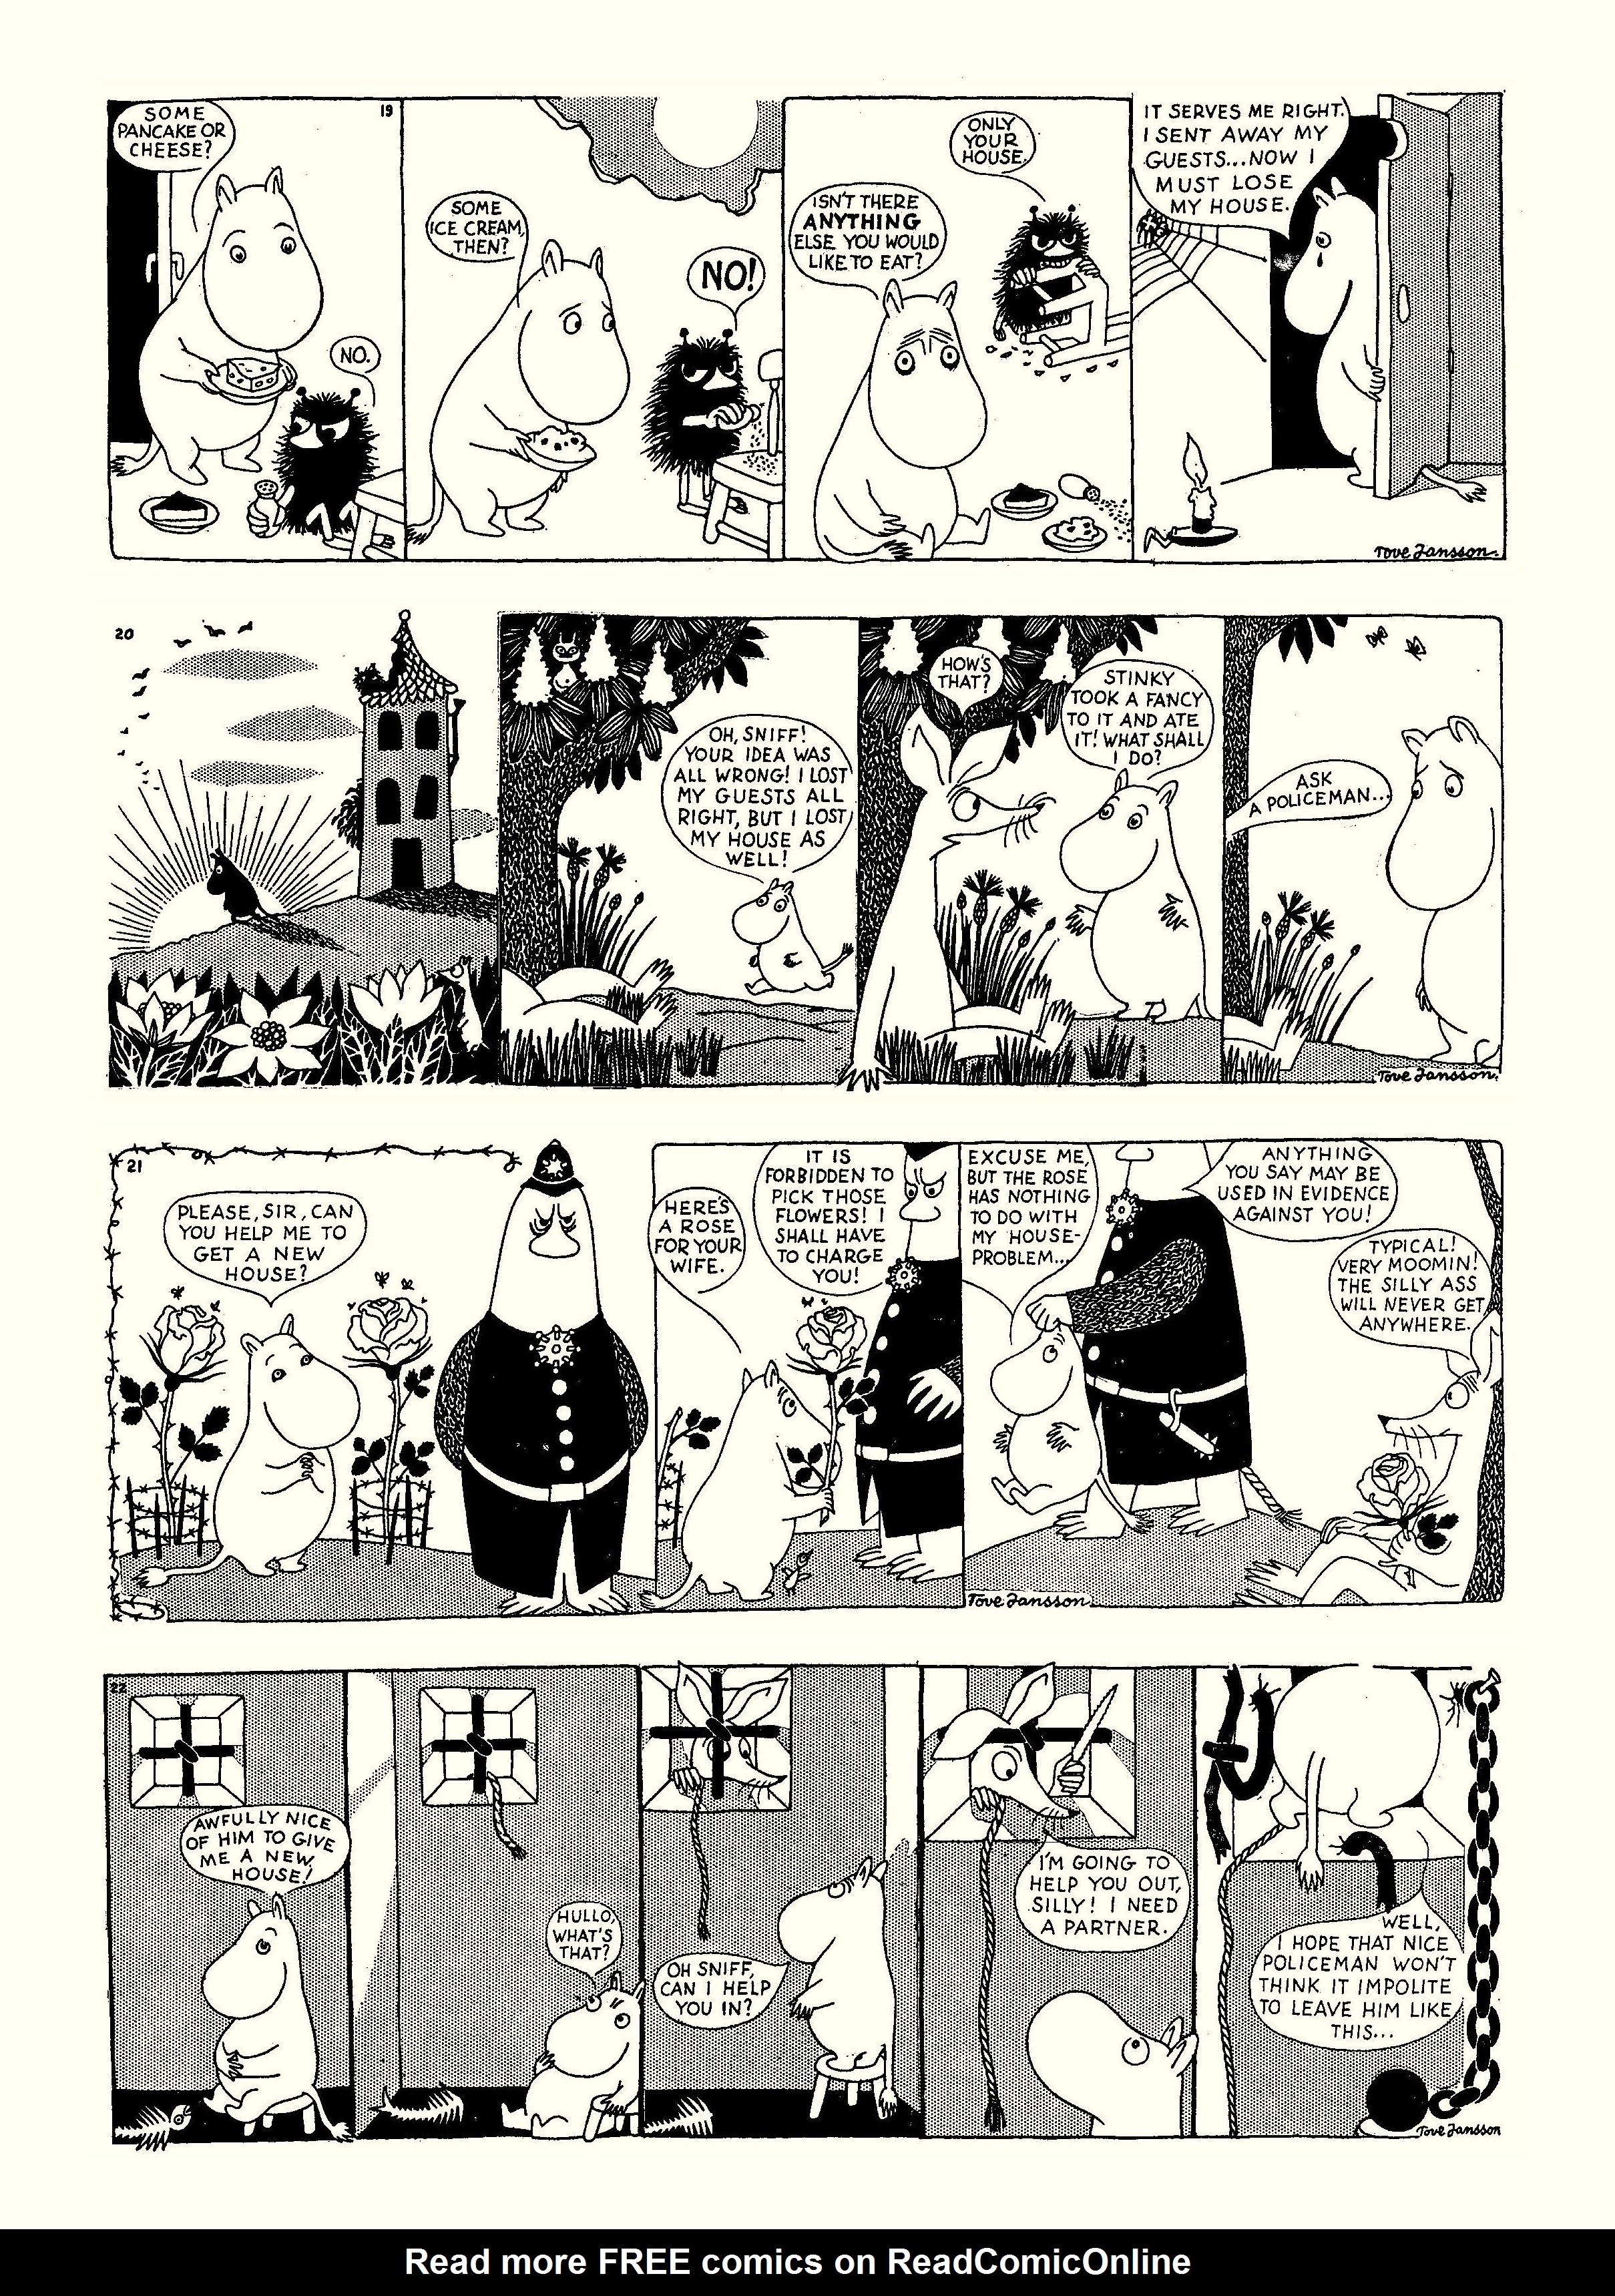 Read online Moomin: The Complete Tove Jansson Comic Strip comic -  Issue # TPB 1 - 11